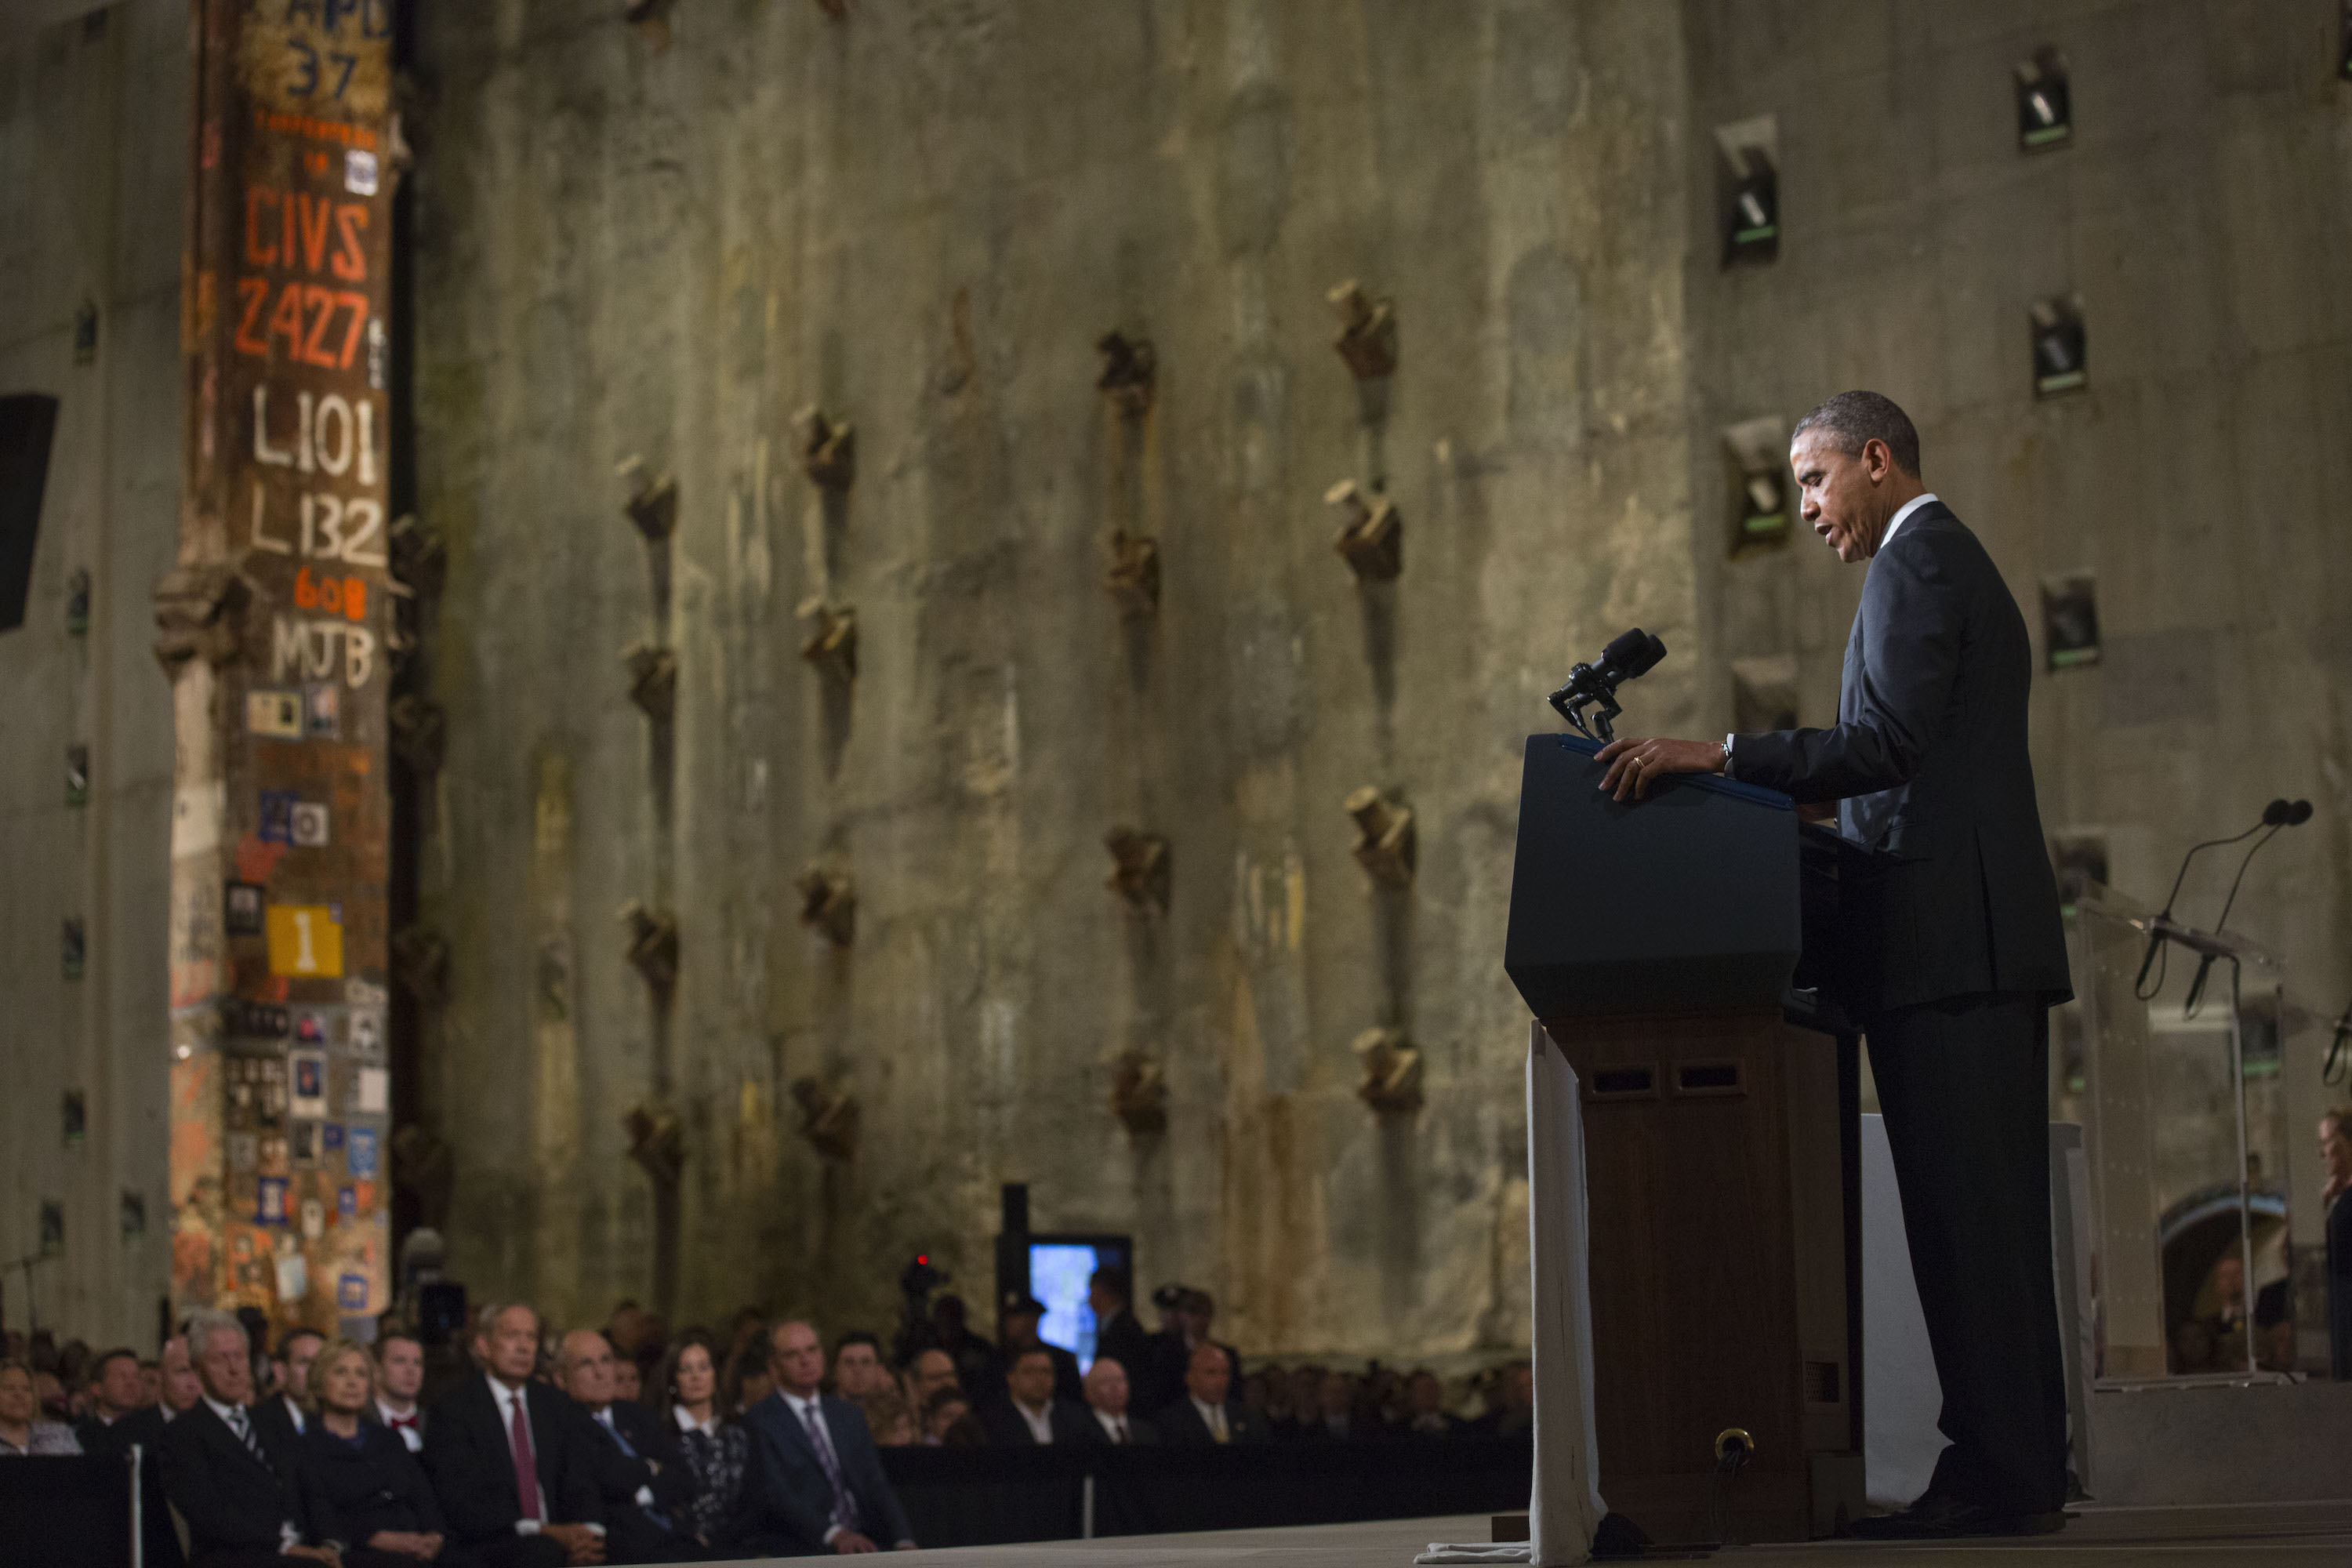 President Barack Obama speaks in Foundation Hall at the dedication of the 9/11 Memorial Museum on May 15, 2014. Former President Bill Clinton, Secretary of State Hillary Clinton, former New York Governor George Pataki, former Mayor Rudy Giuliani, and others watch on with the Last Column and slurry wall behind them. 